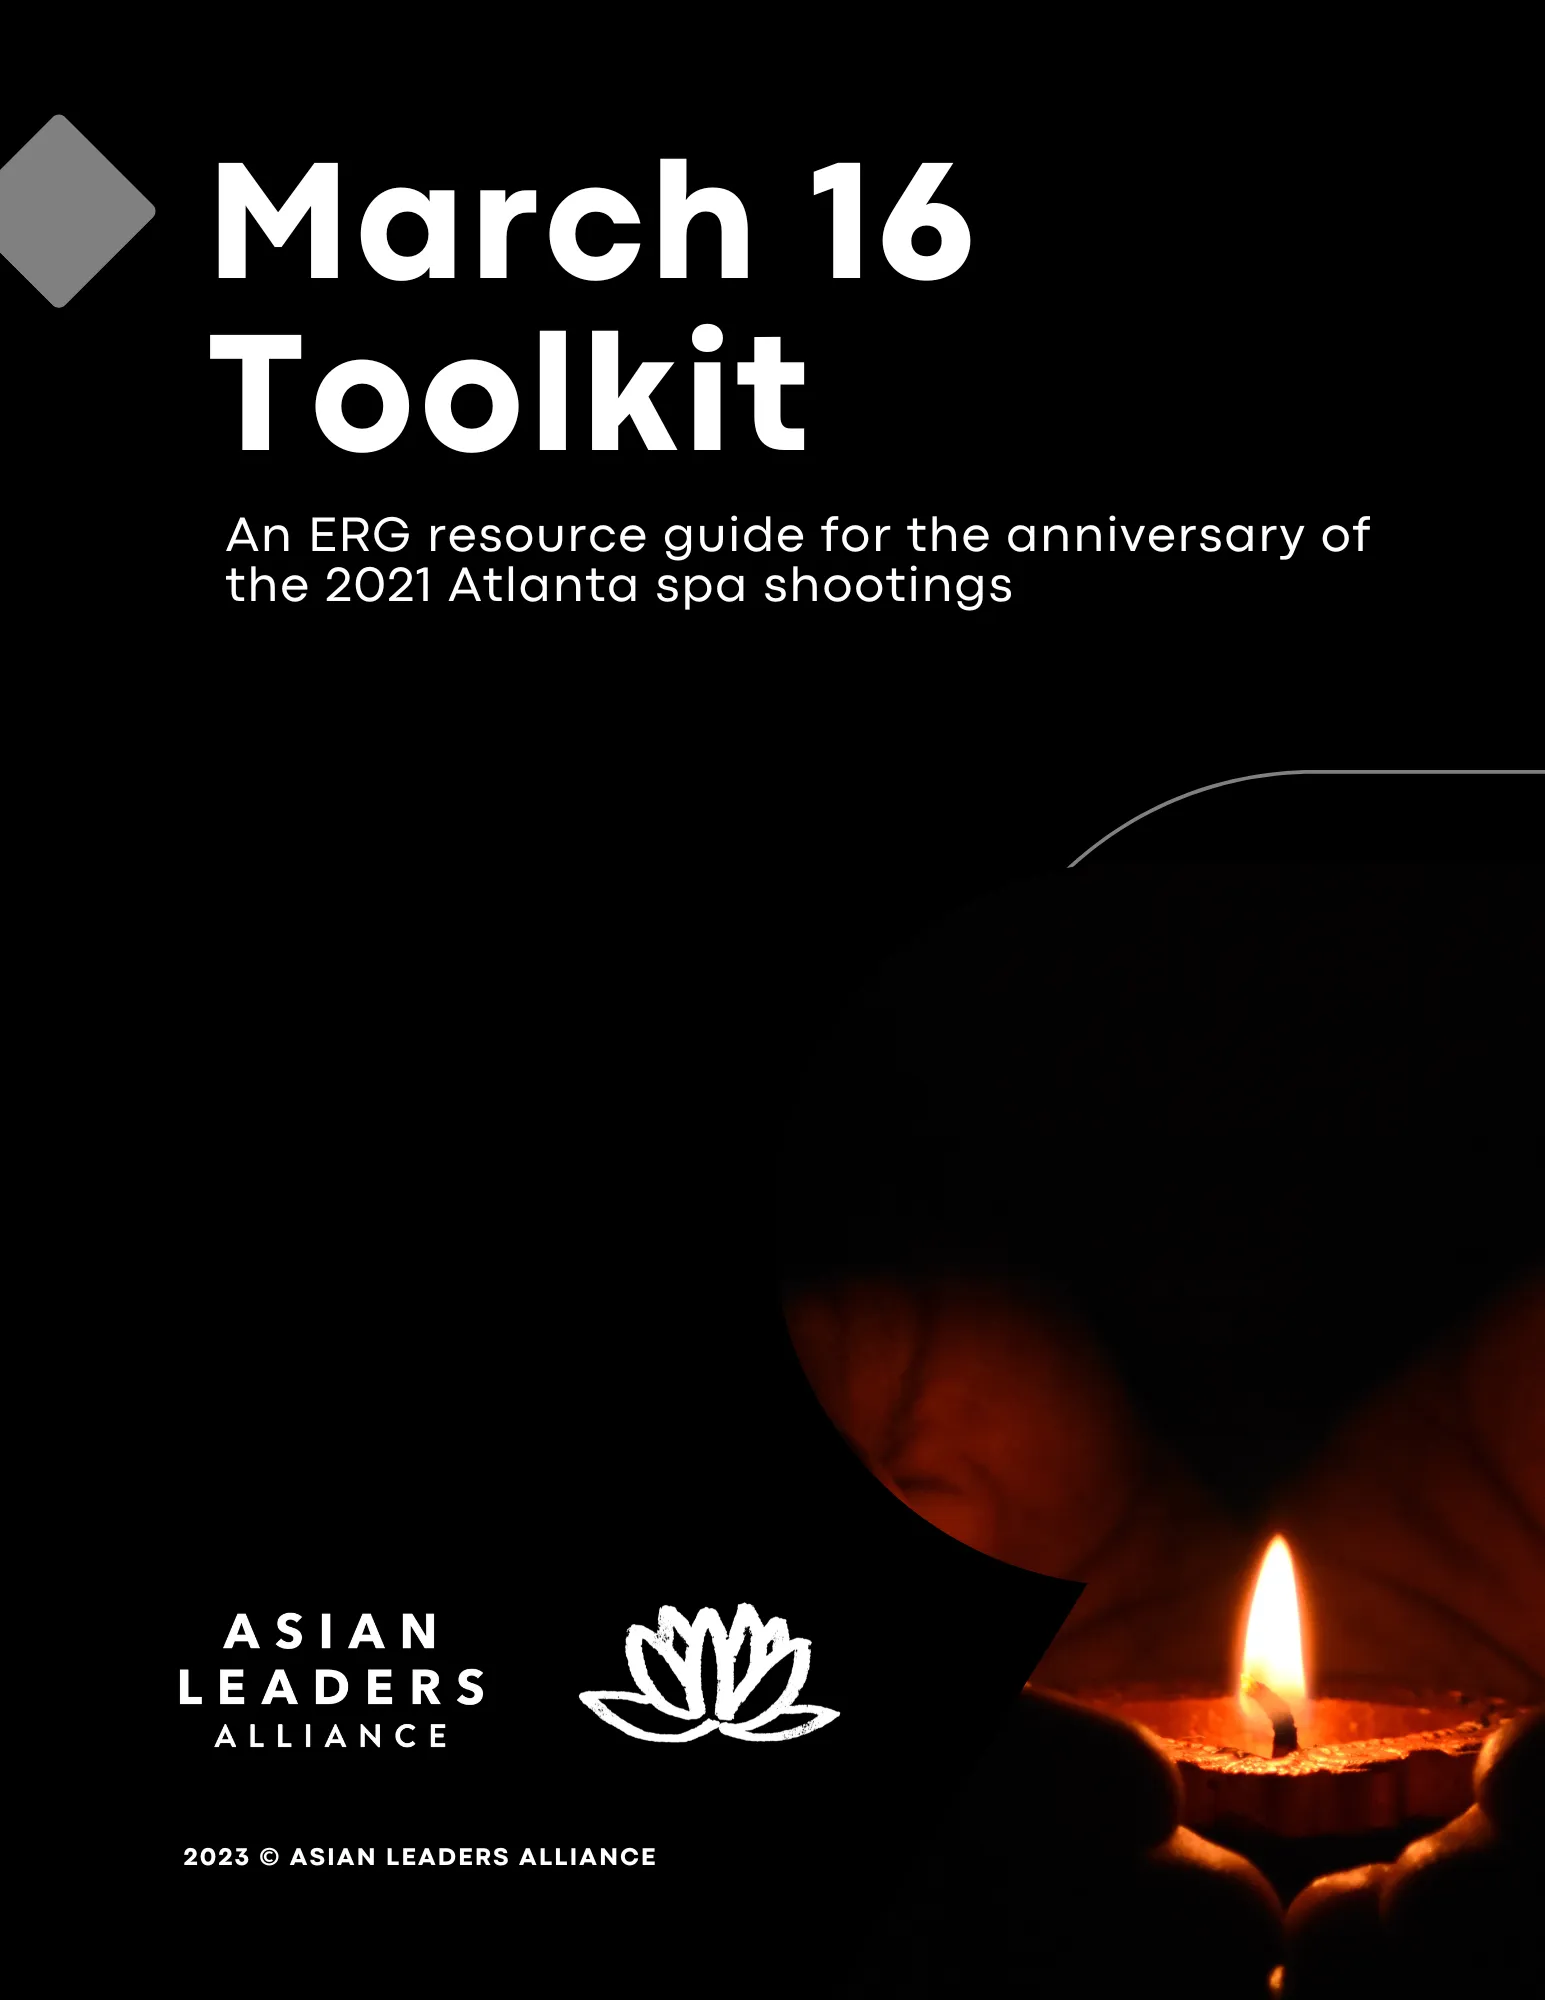 Under the Guides and Kits section There are multiple grid items with an image/link. Each image is a link to the specific resources.
a black background with "March 16 Toolkit - A resource for Asian ERGs in preparing for the anniversary of the Atlanta spa shootings" title in white top left centered. Lower right corner hands holding a lit clay butter lamp (diya) showing flame glow on the cupped hands. Bottom center lotus outline lined in white. Bottom Left Asian Leaders Alliance written in gold lettering. Image is a link to the resource 